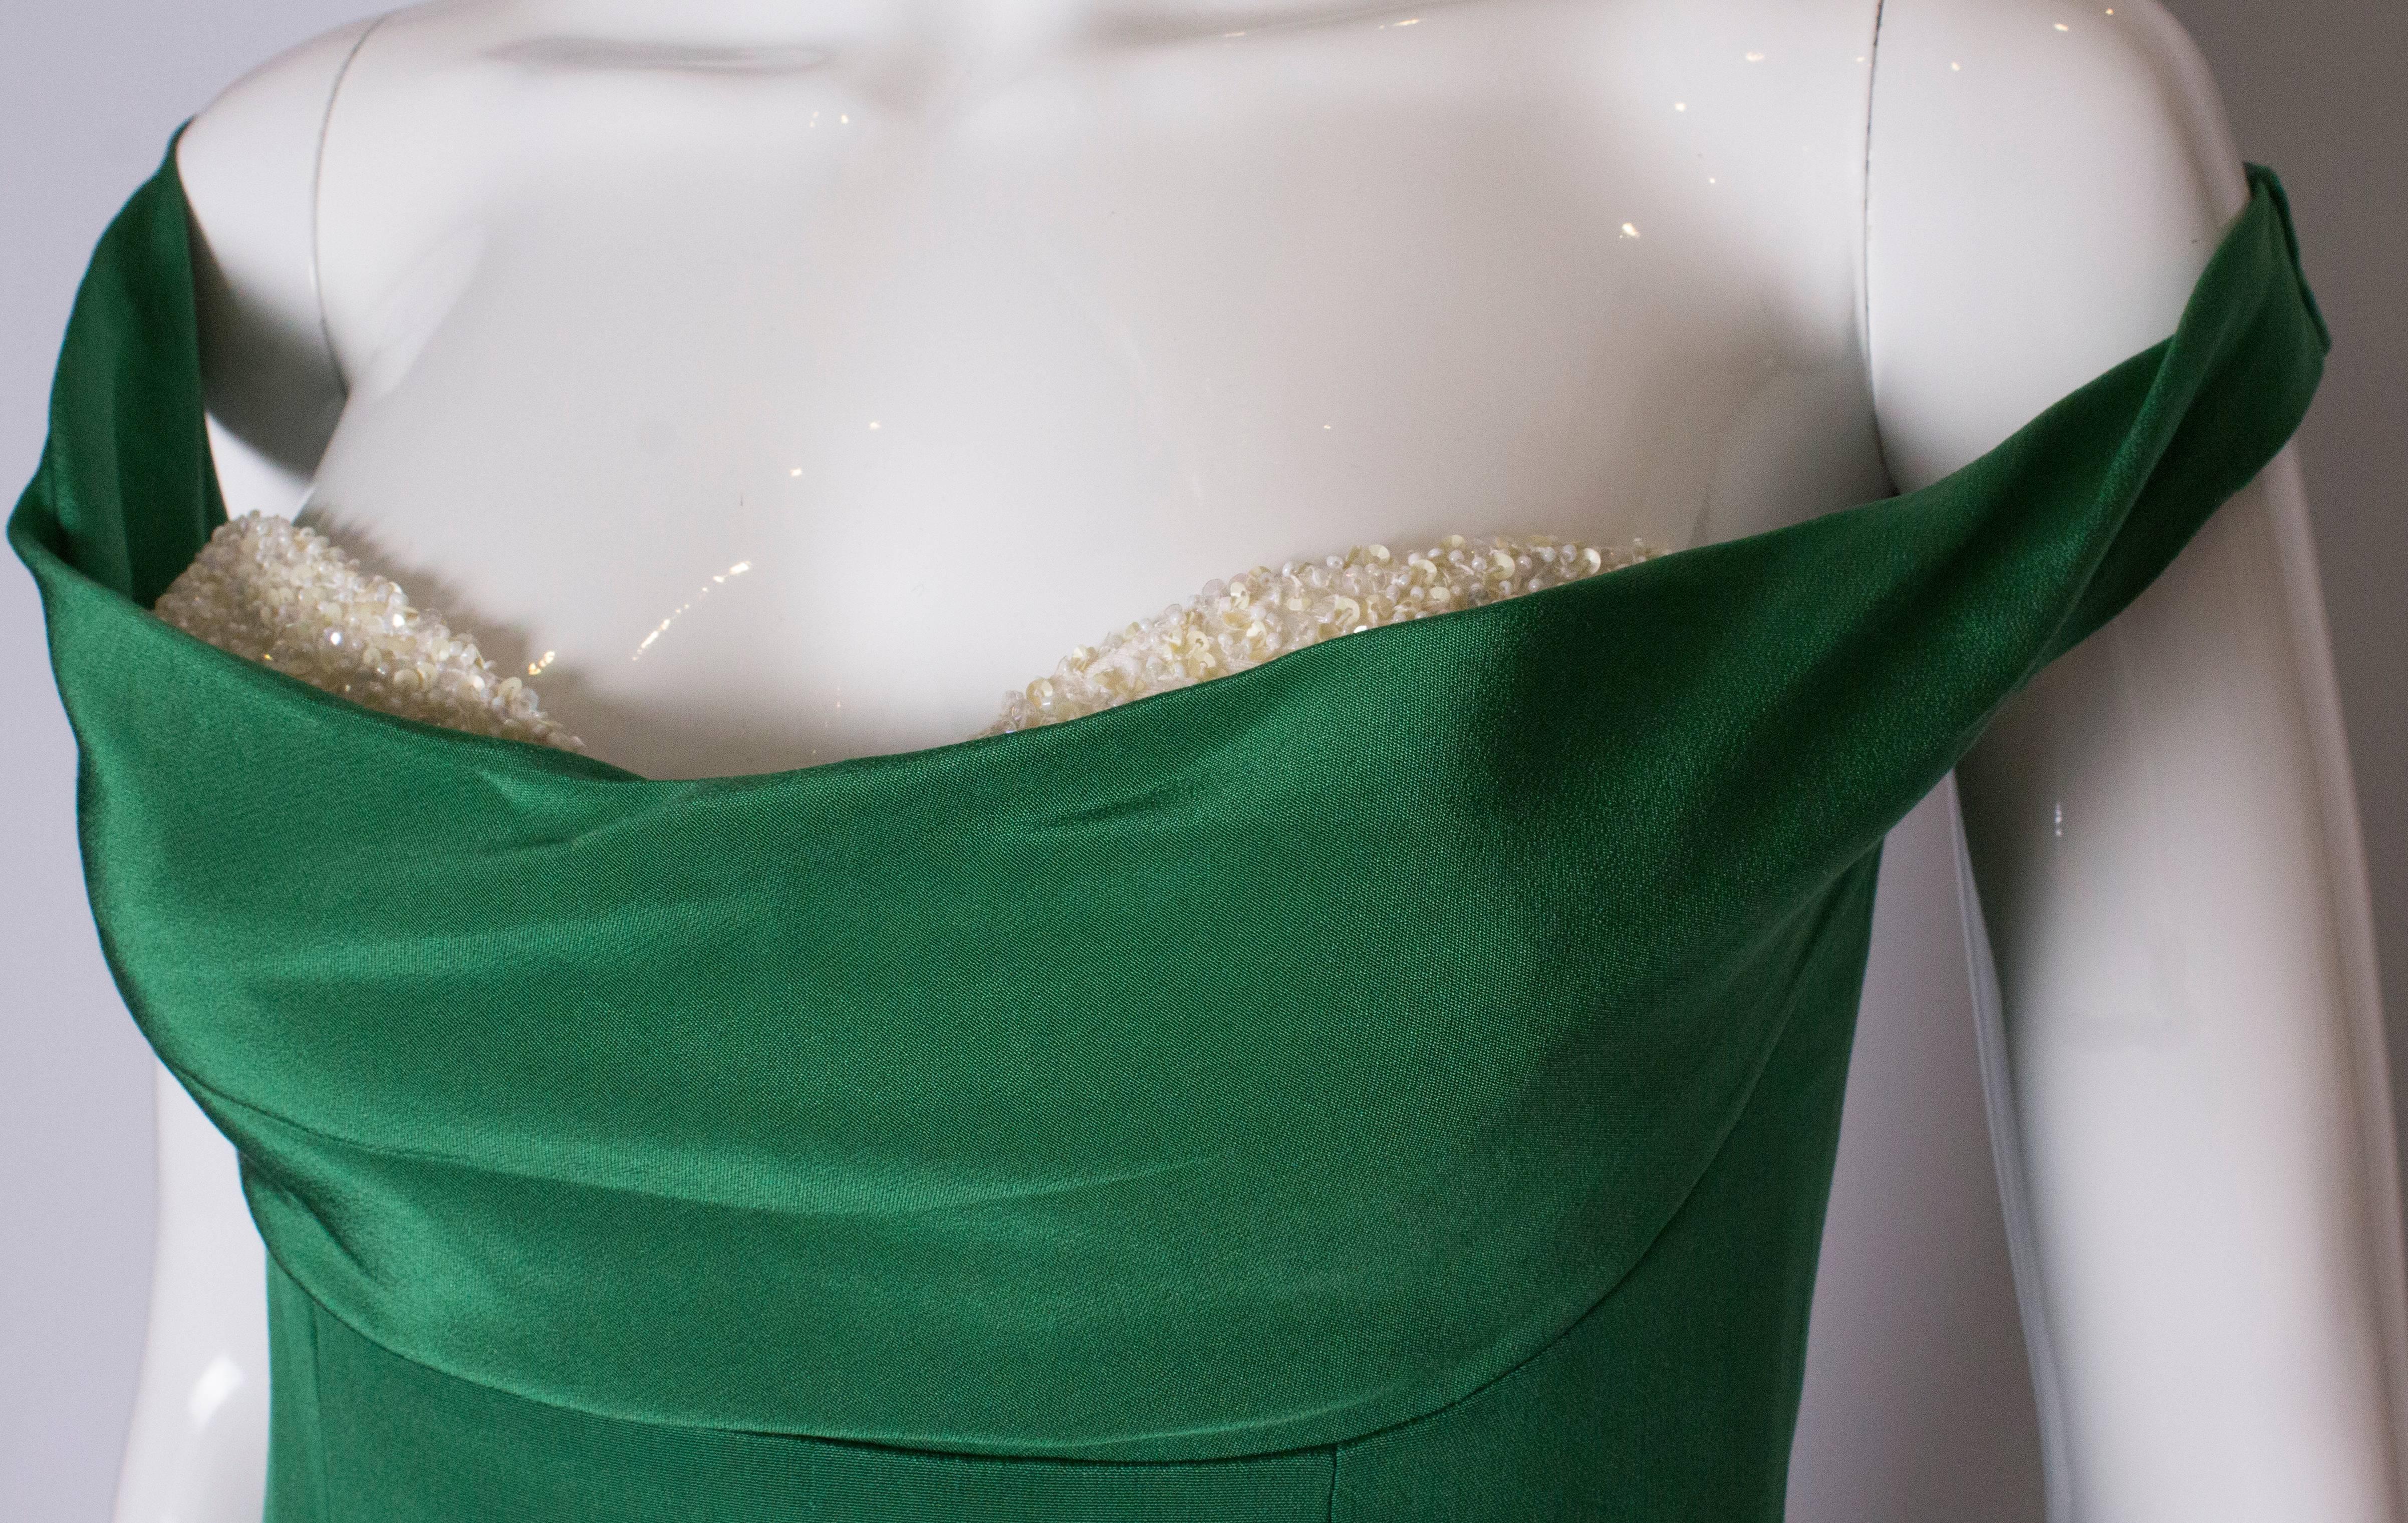 A chic cocktail dress by Tomasz Starzewski. The dress is green with a white beaded front/modesty patch.It is off the shoulder, boned and fully lined with a central back zip. A real head turner.